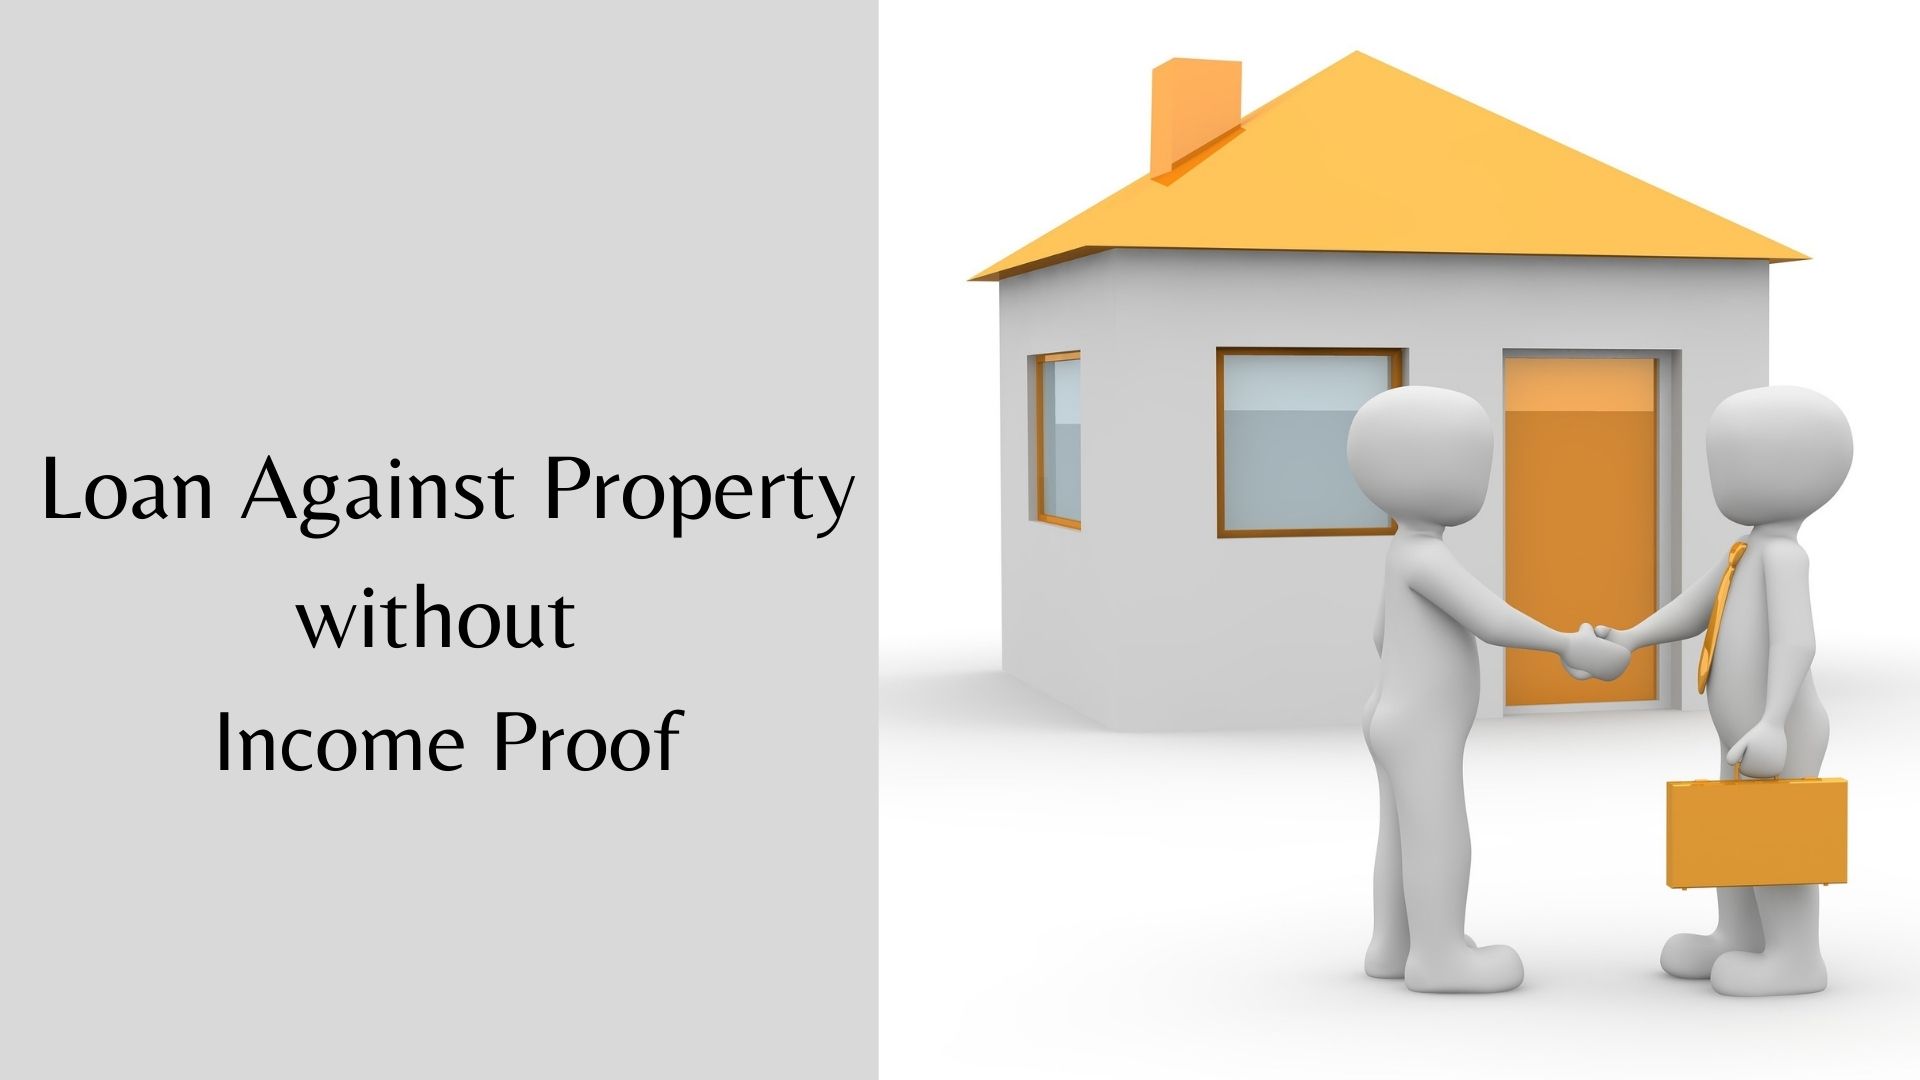 Loan Against Property without income proof 